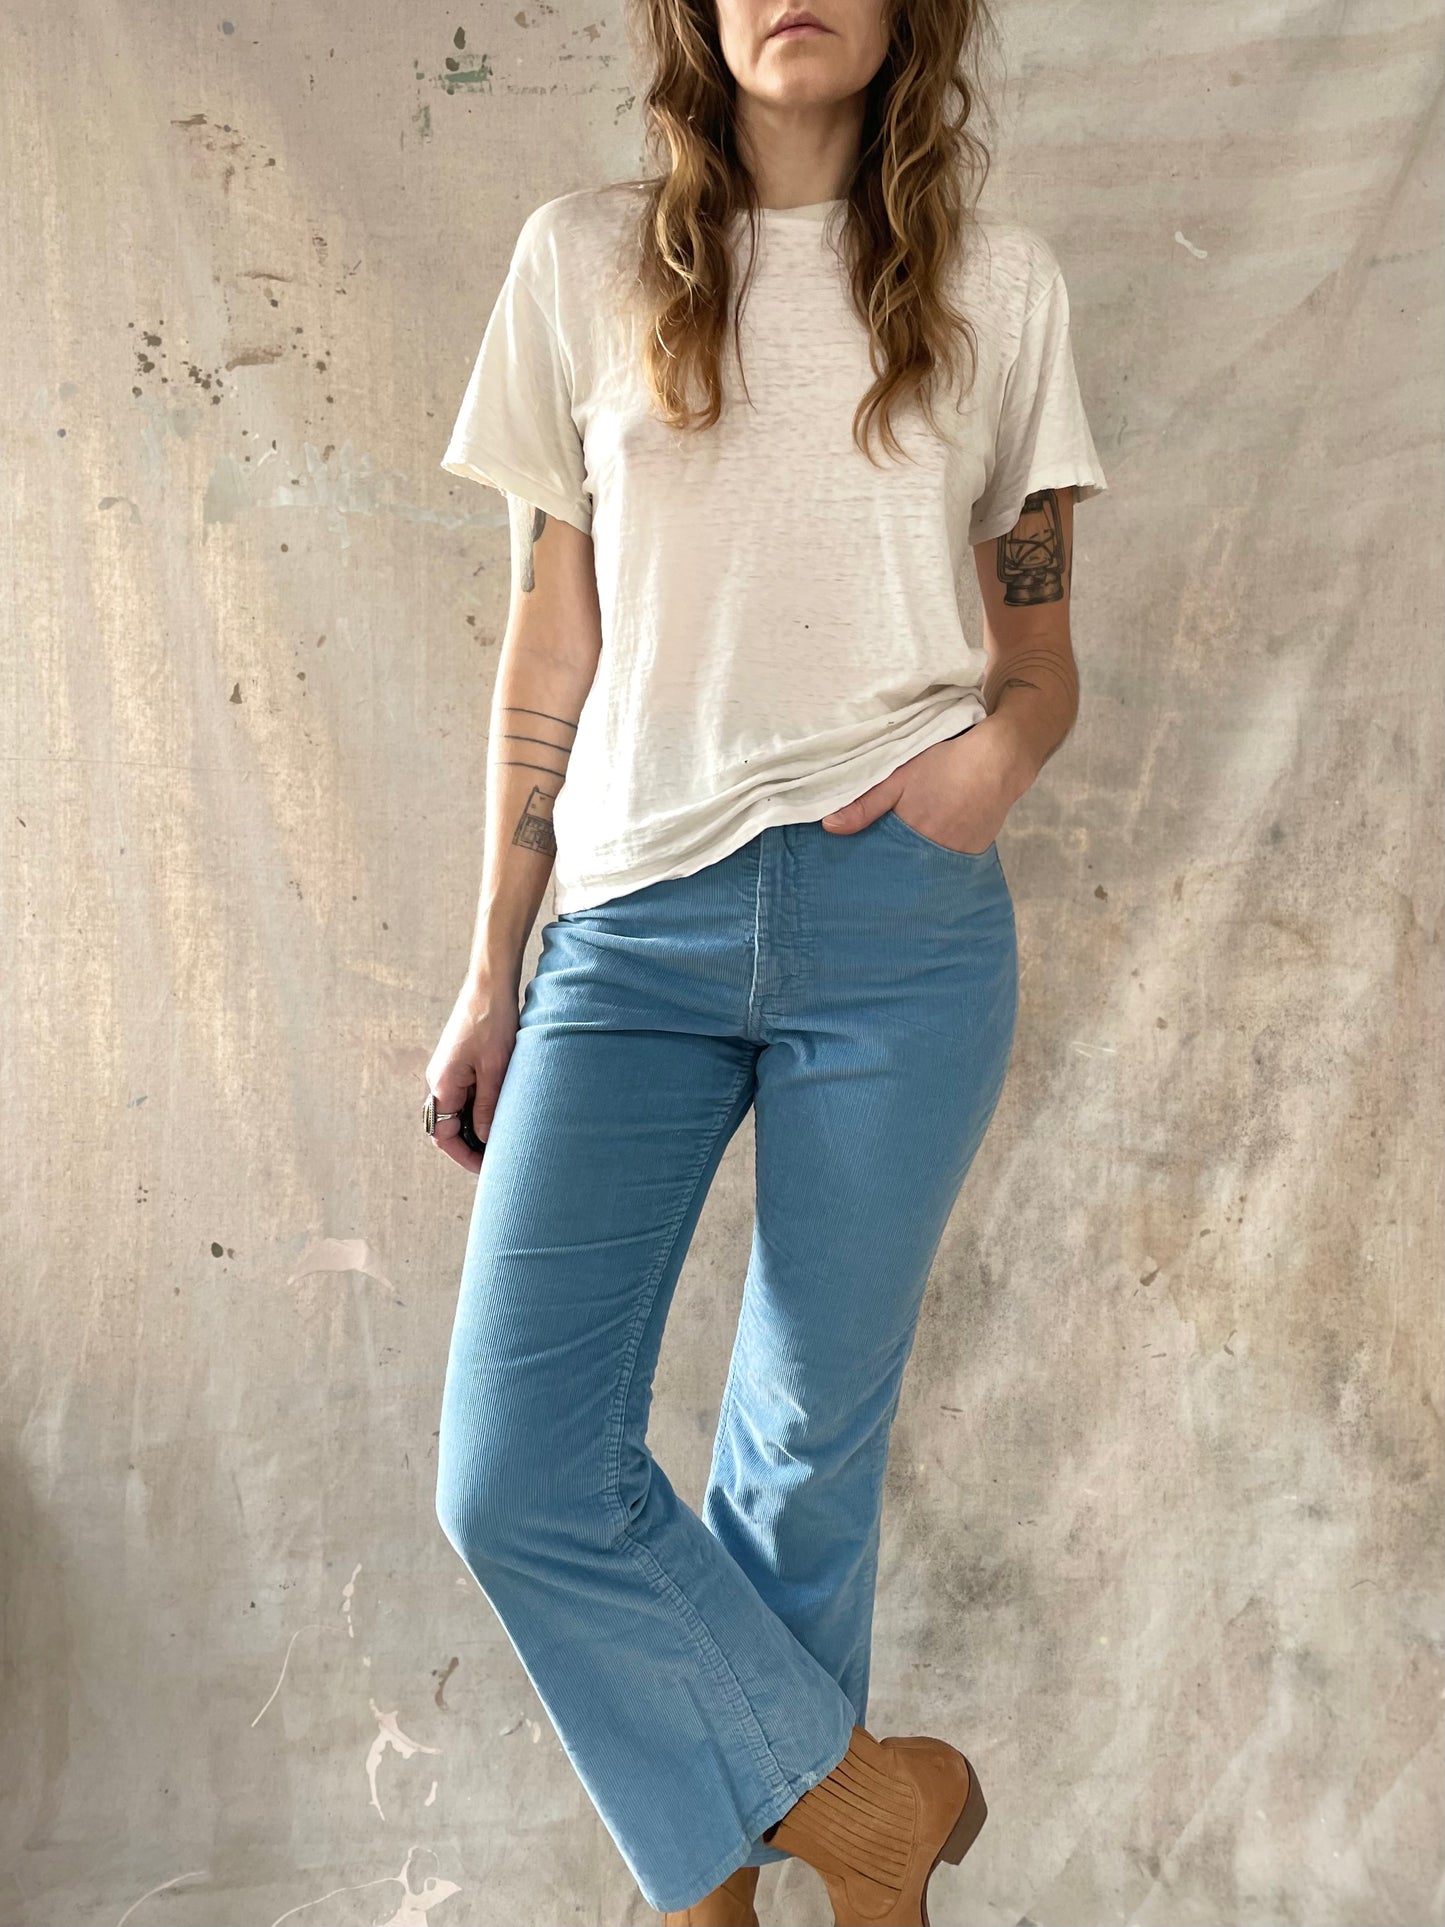 70s Baby Blue Levi’s Corduroy Bell Bottoms